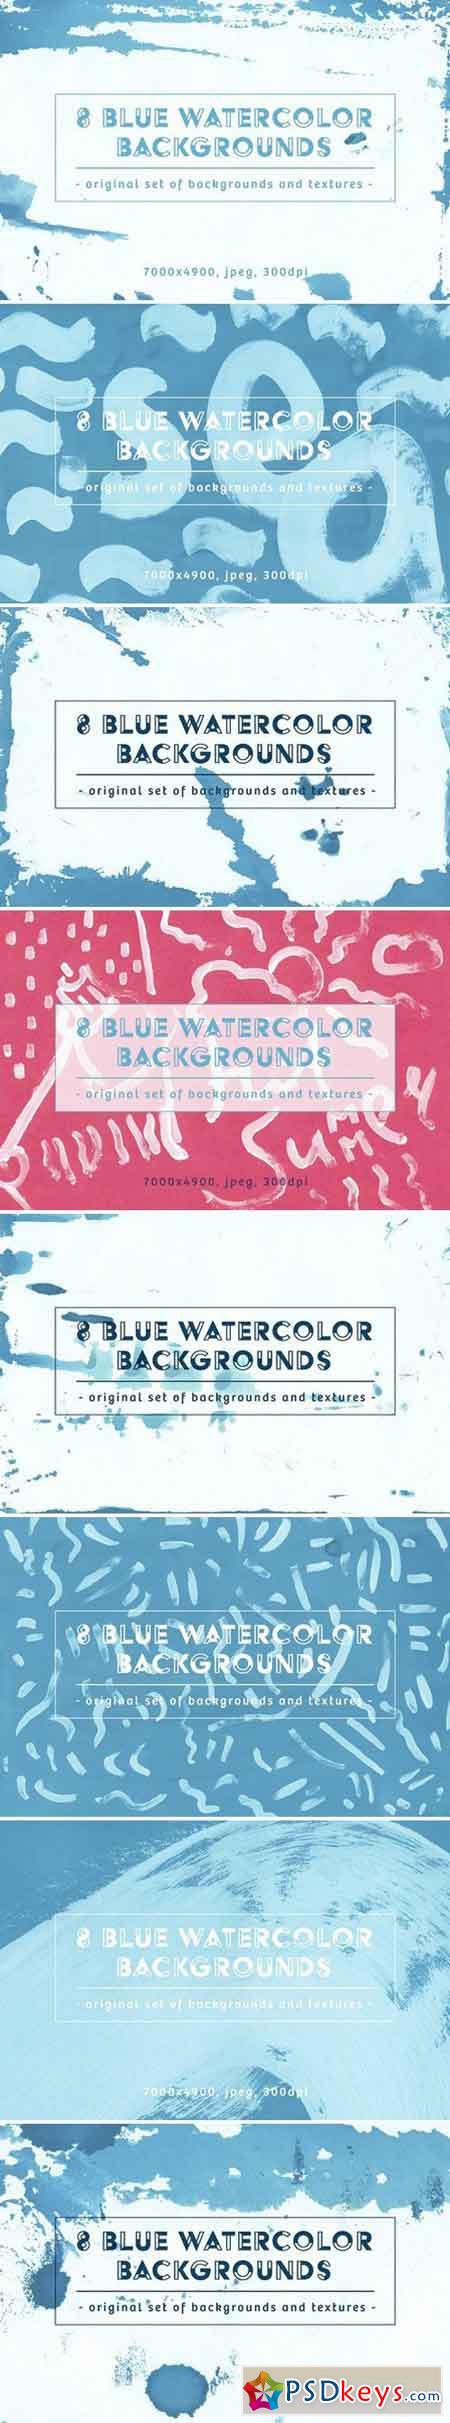 Set of 8 Blue watercolor Backgrounds 2043021